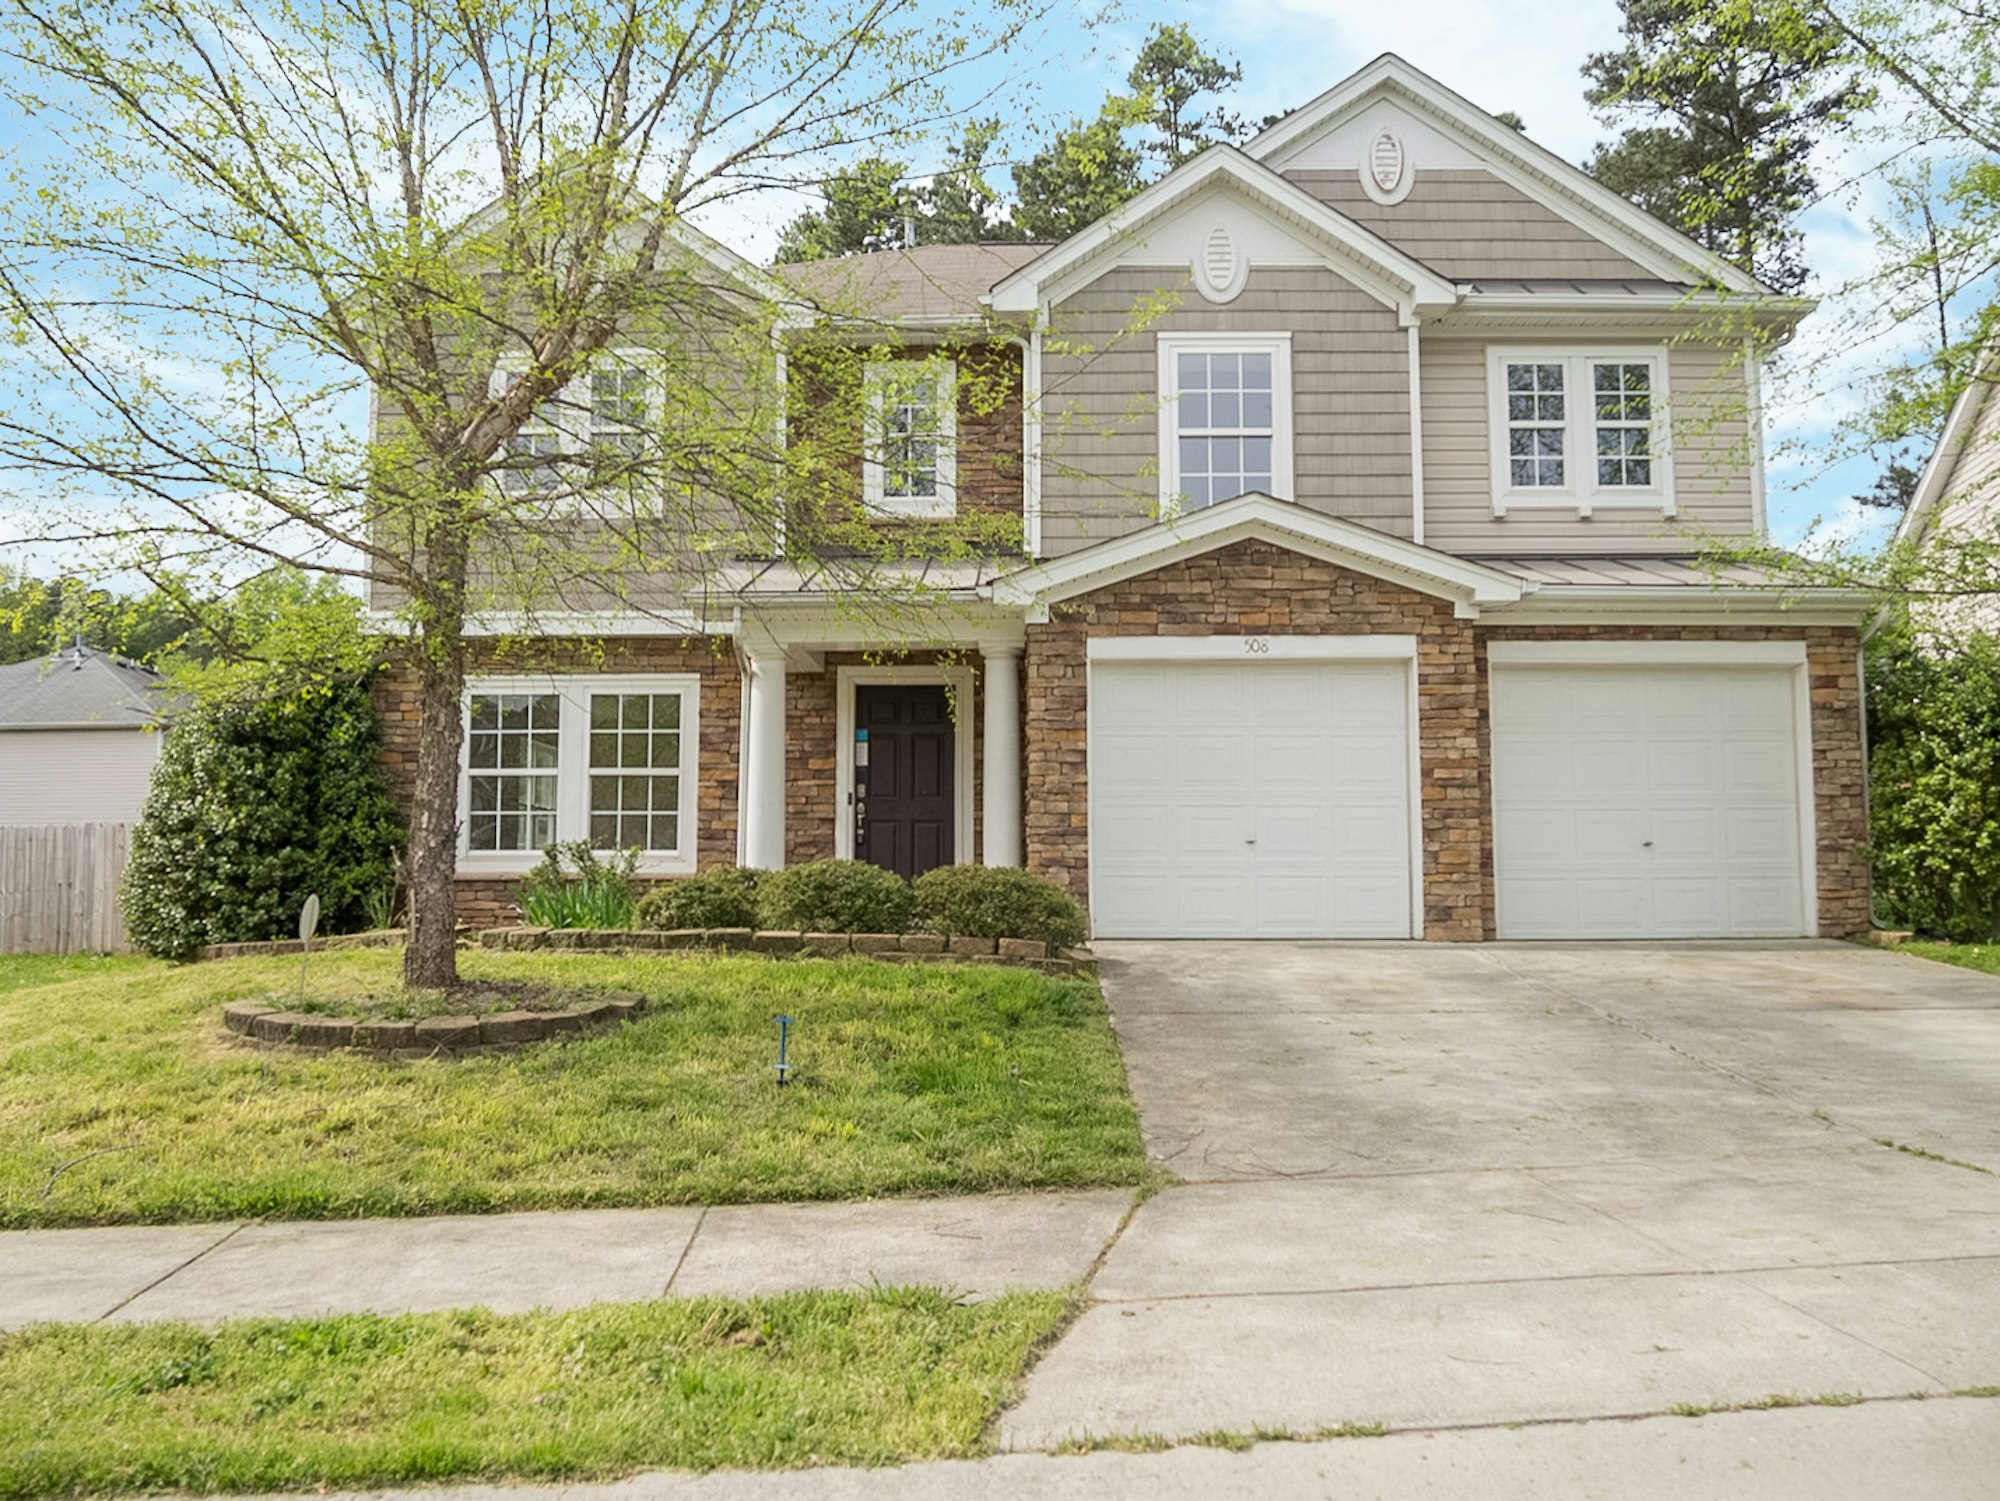 Photo 1 of 37 - 508 Hillview Dr, Durham, NC 27703